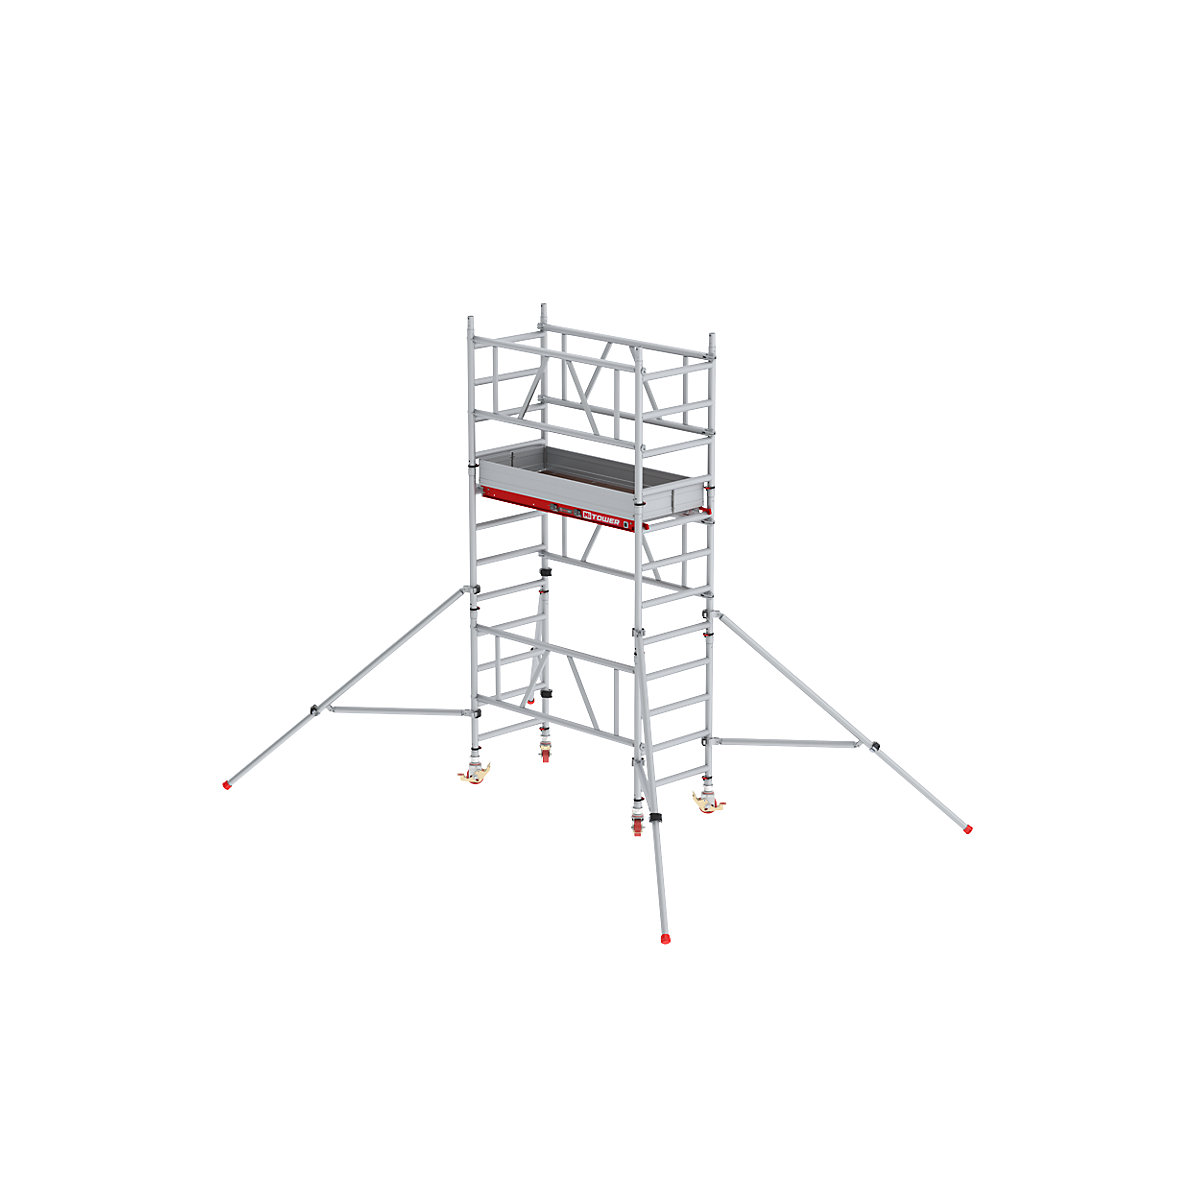 MiTOWER Plus quick assembly mobile access tower – Altrex